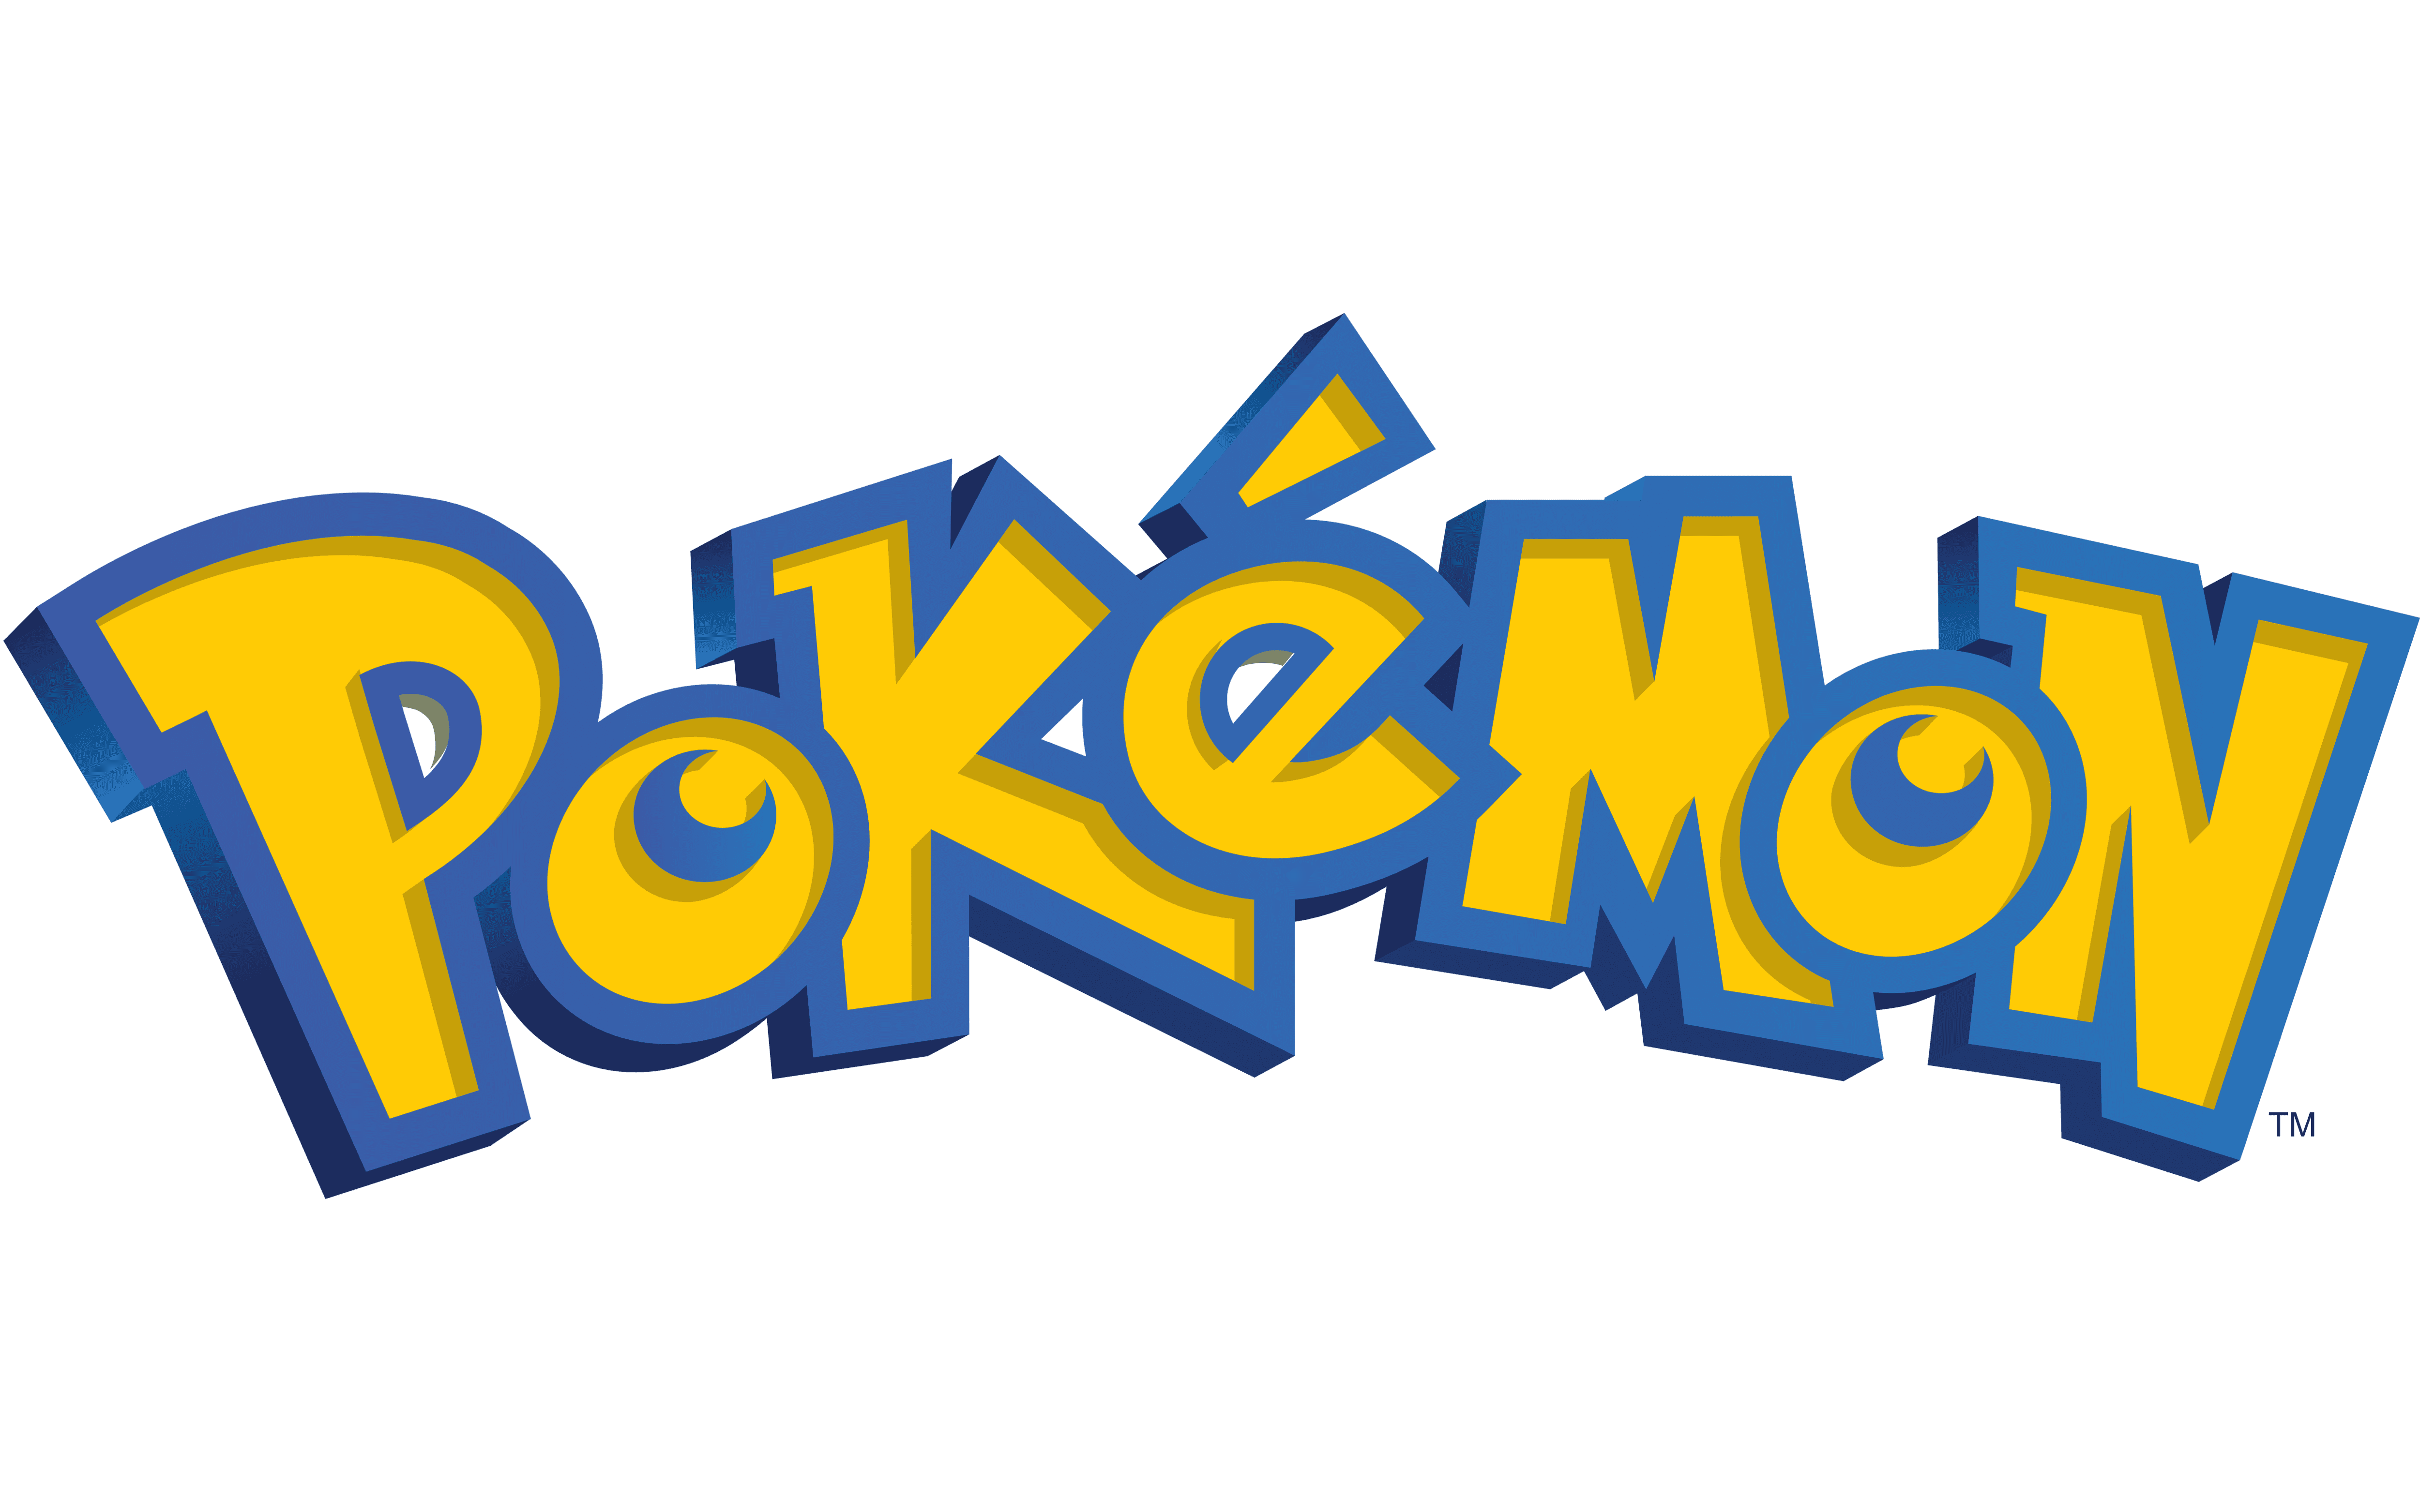 <p>We buy ALL your POKEMON cards from all years except basic cards.</p><ul><li>We offer between <strong>65 and 75%</strong> of the market value in return for store credit.</li></ul><p>OR </p><ul><li>We offer between <strong>55 and 65%</strong> of the market value in return for cash.</li></ul>